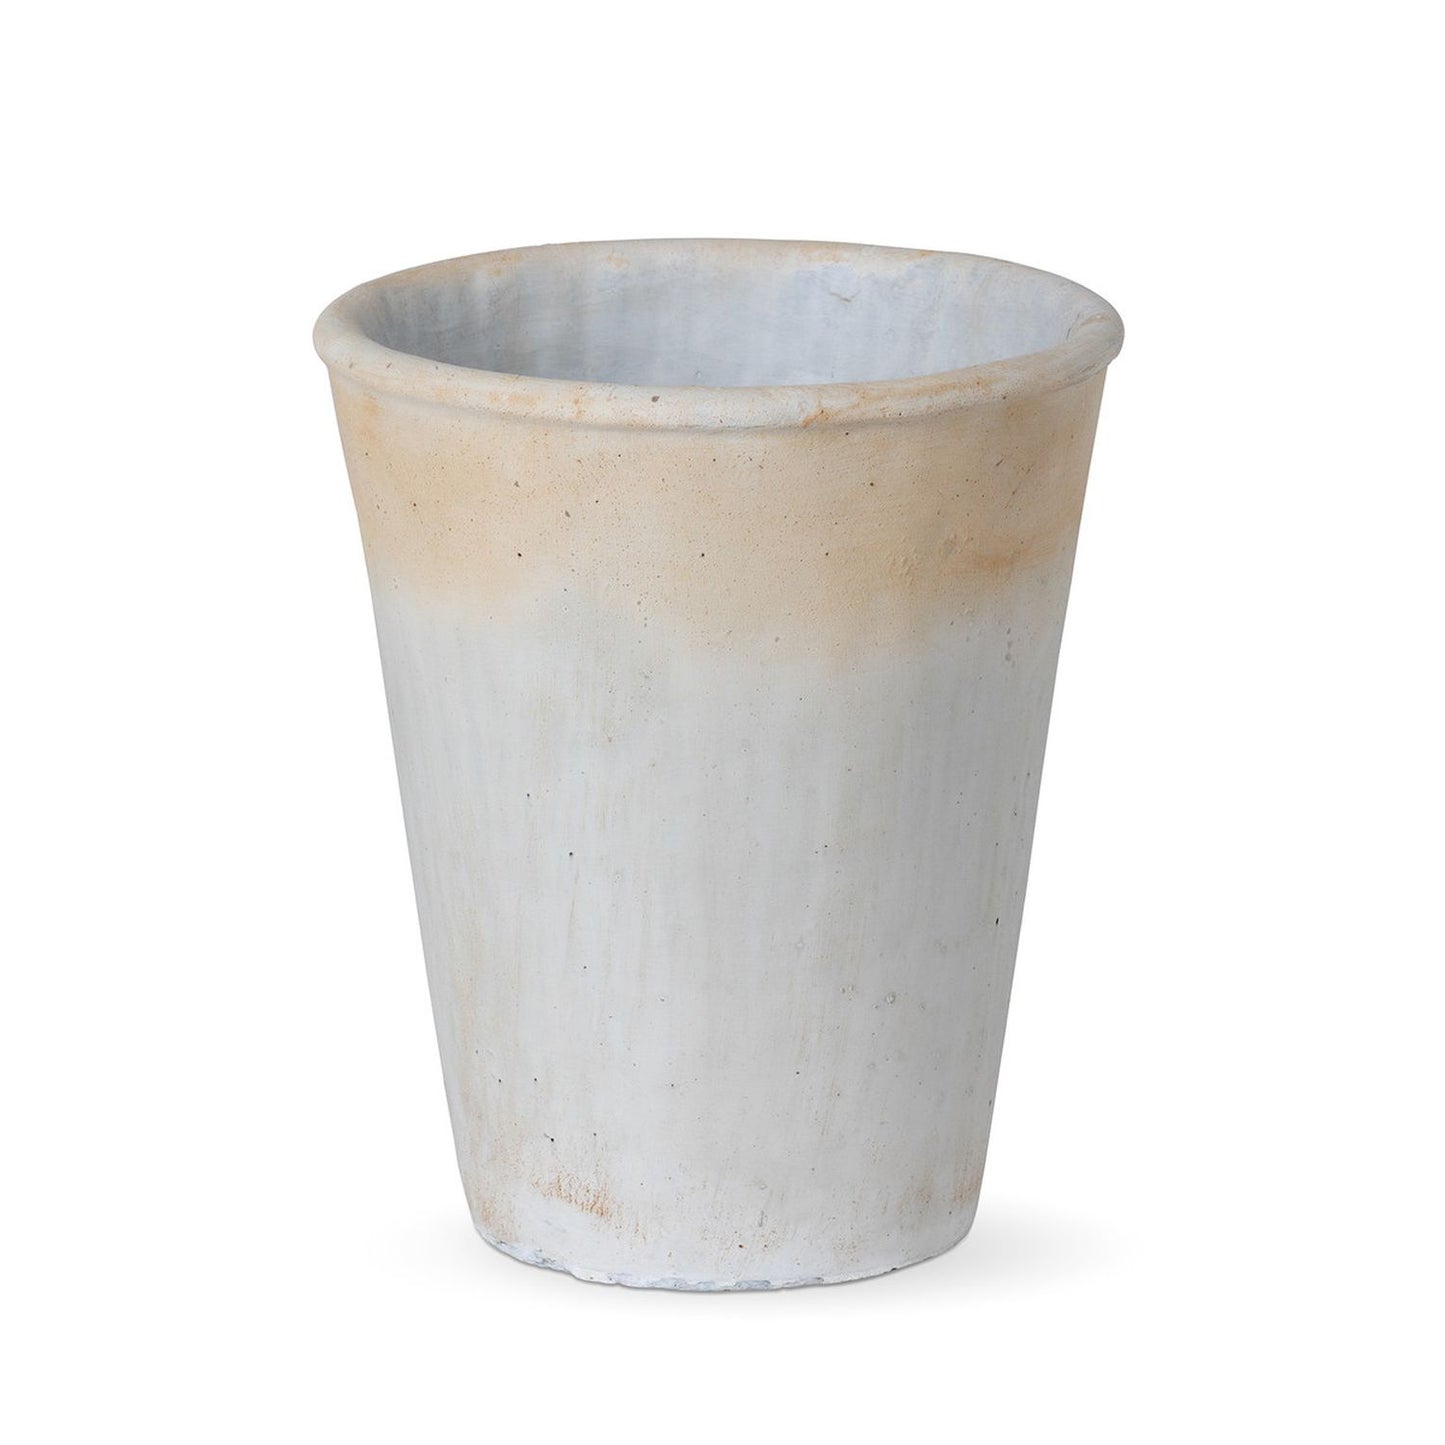 Park Hill Collection Country French Distressed Concrete Tall Planter